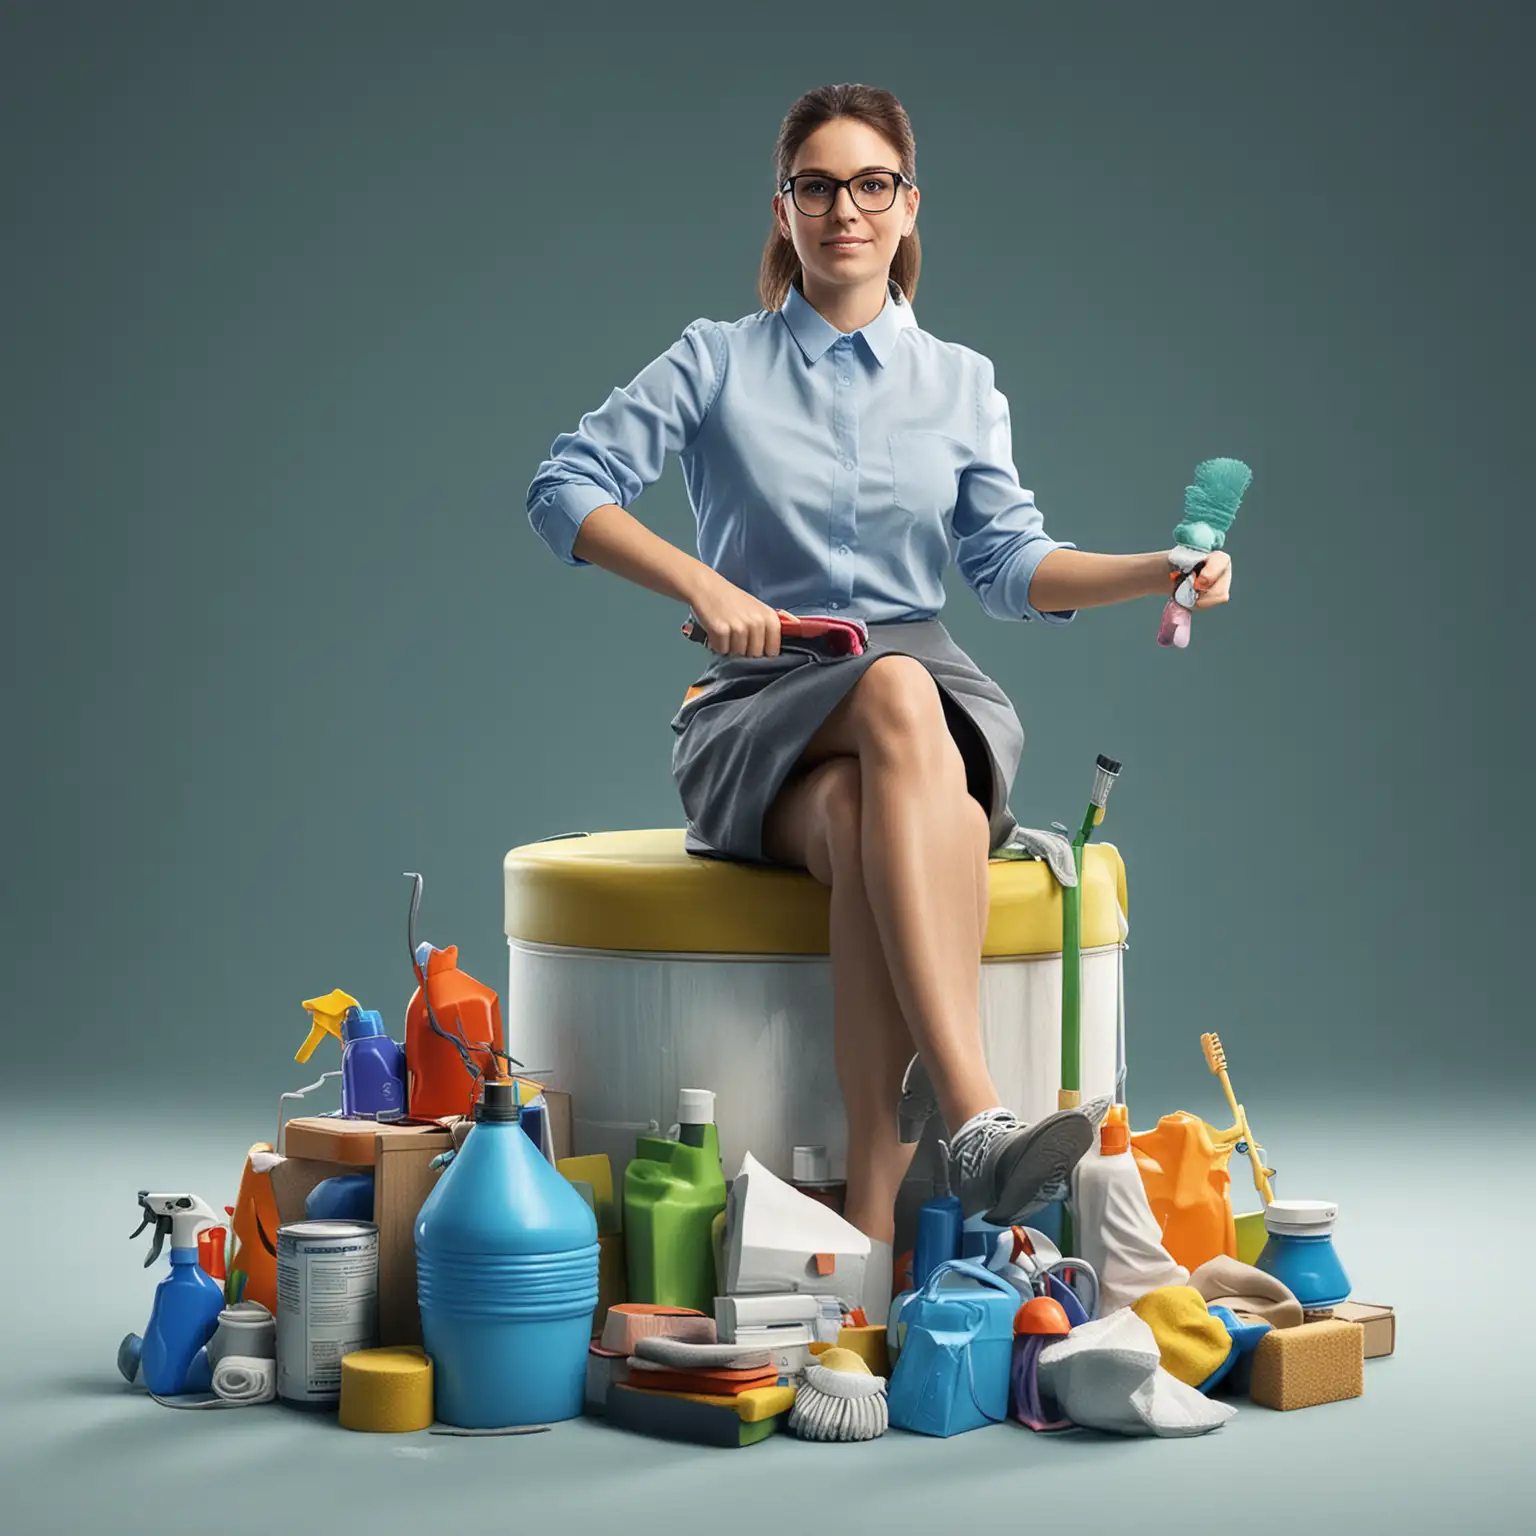 depict a teacher sitting on 3D cleaning supplies media